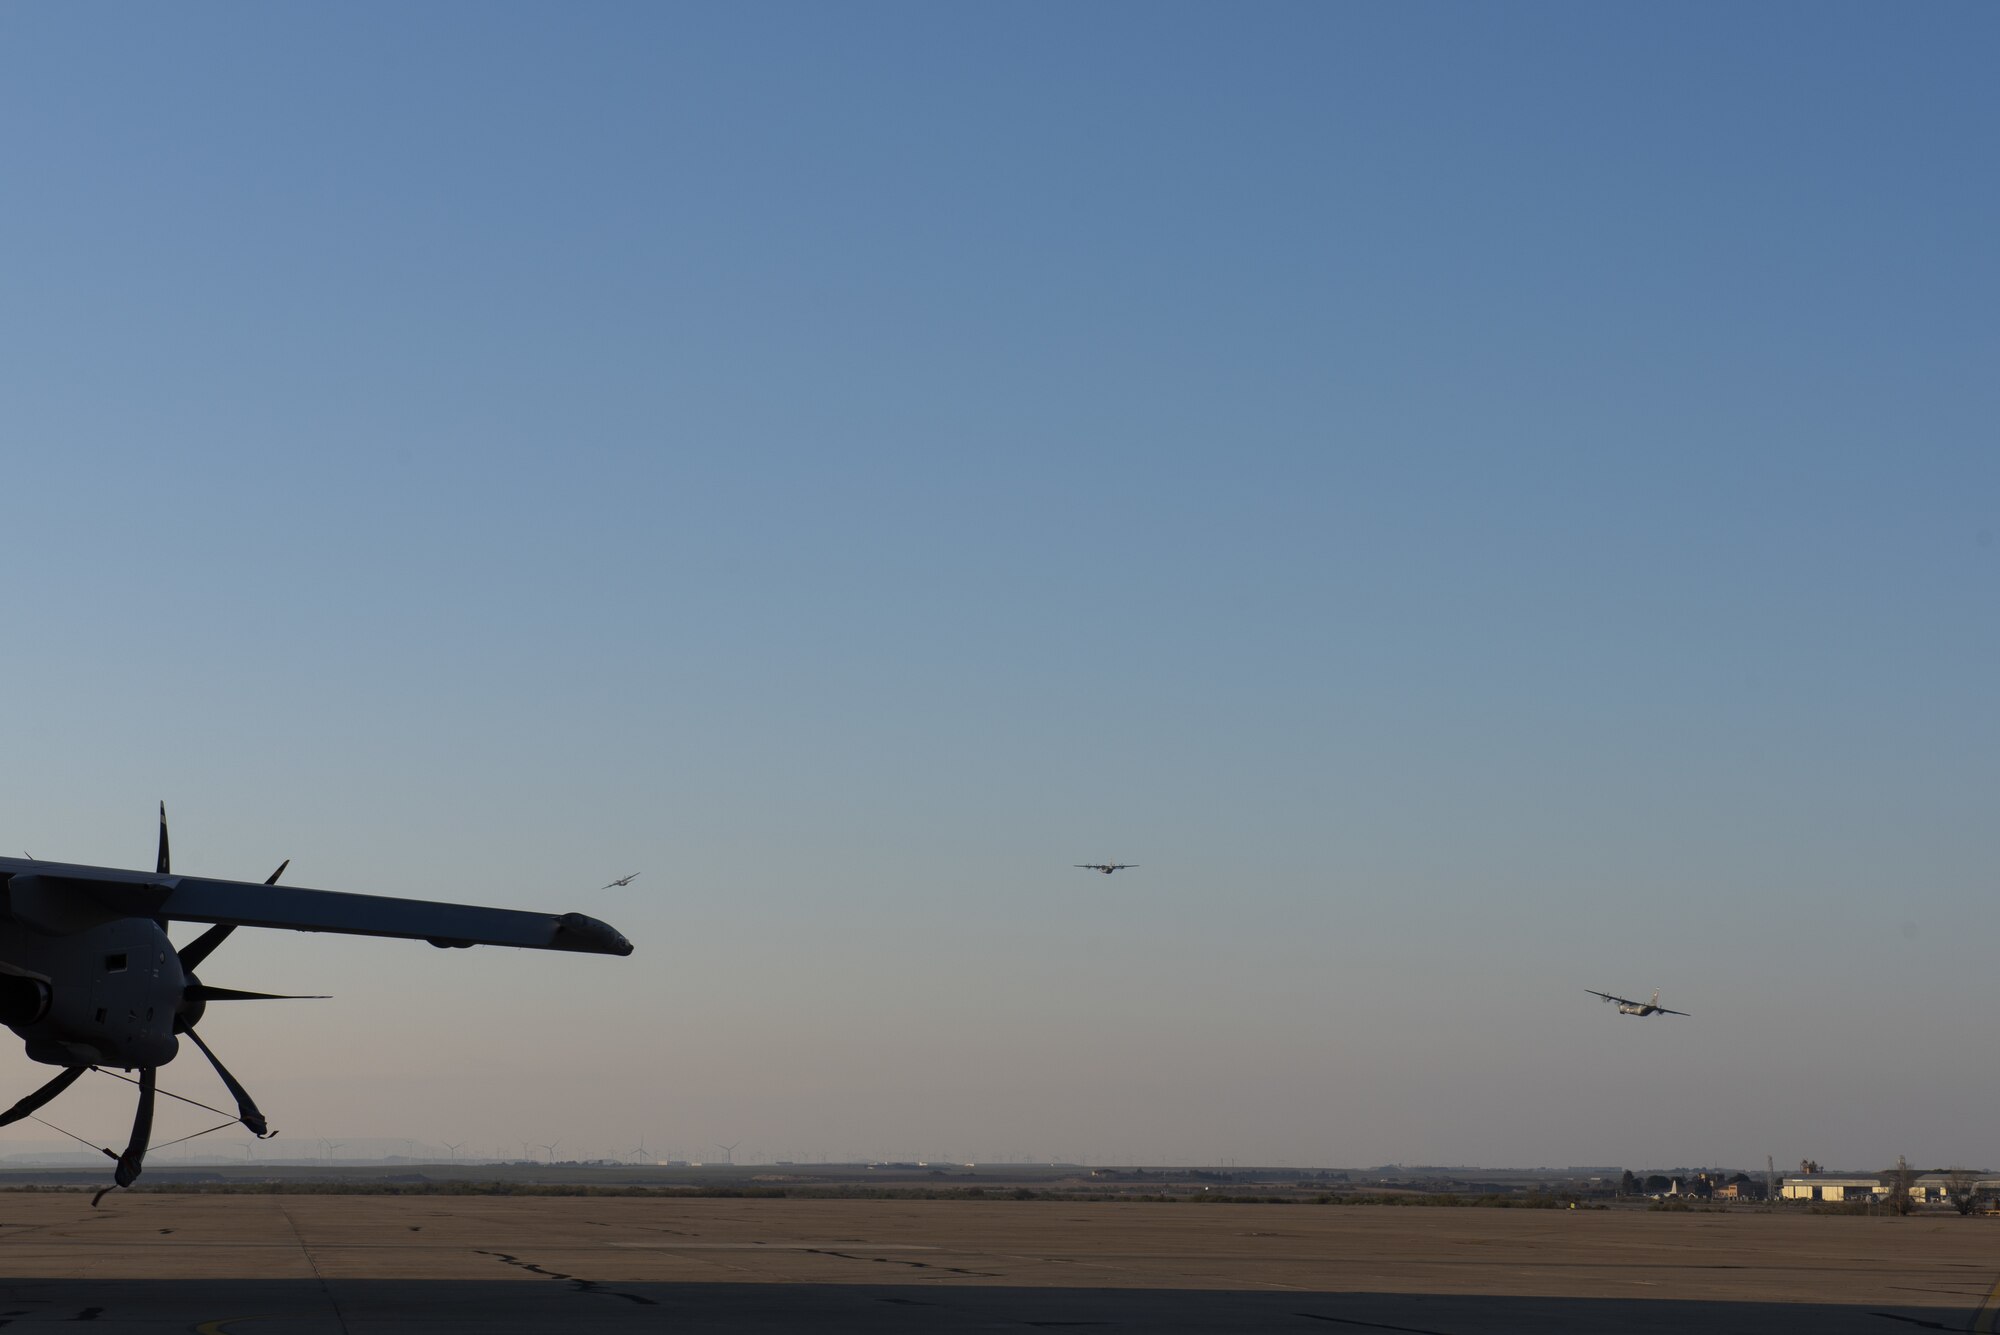 Three aircraft are in the blue sky